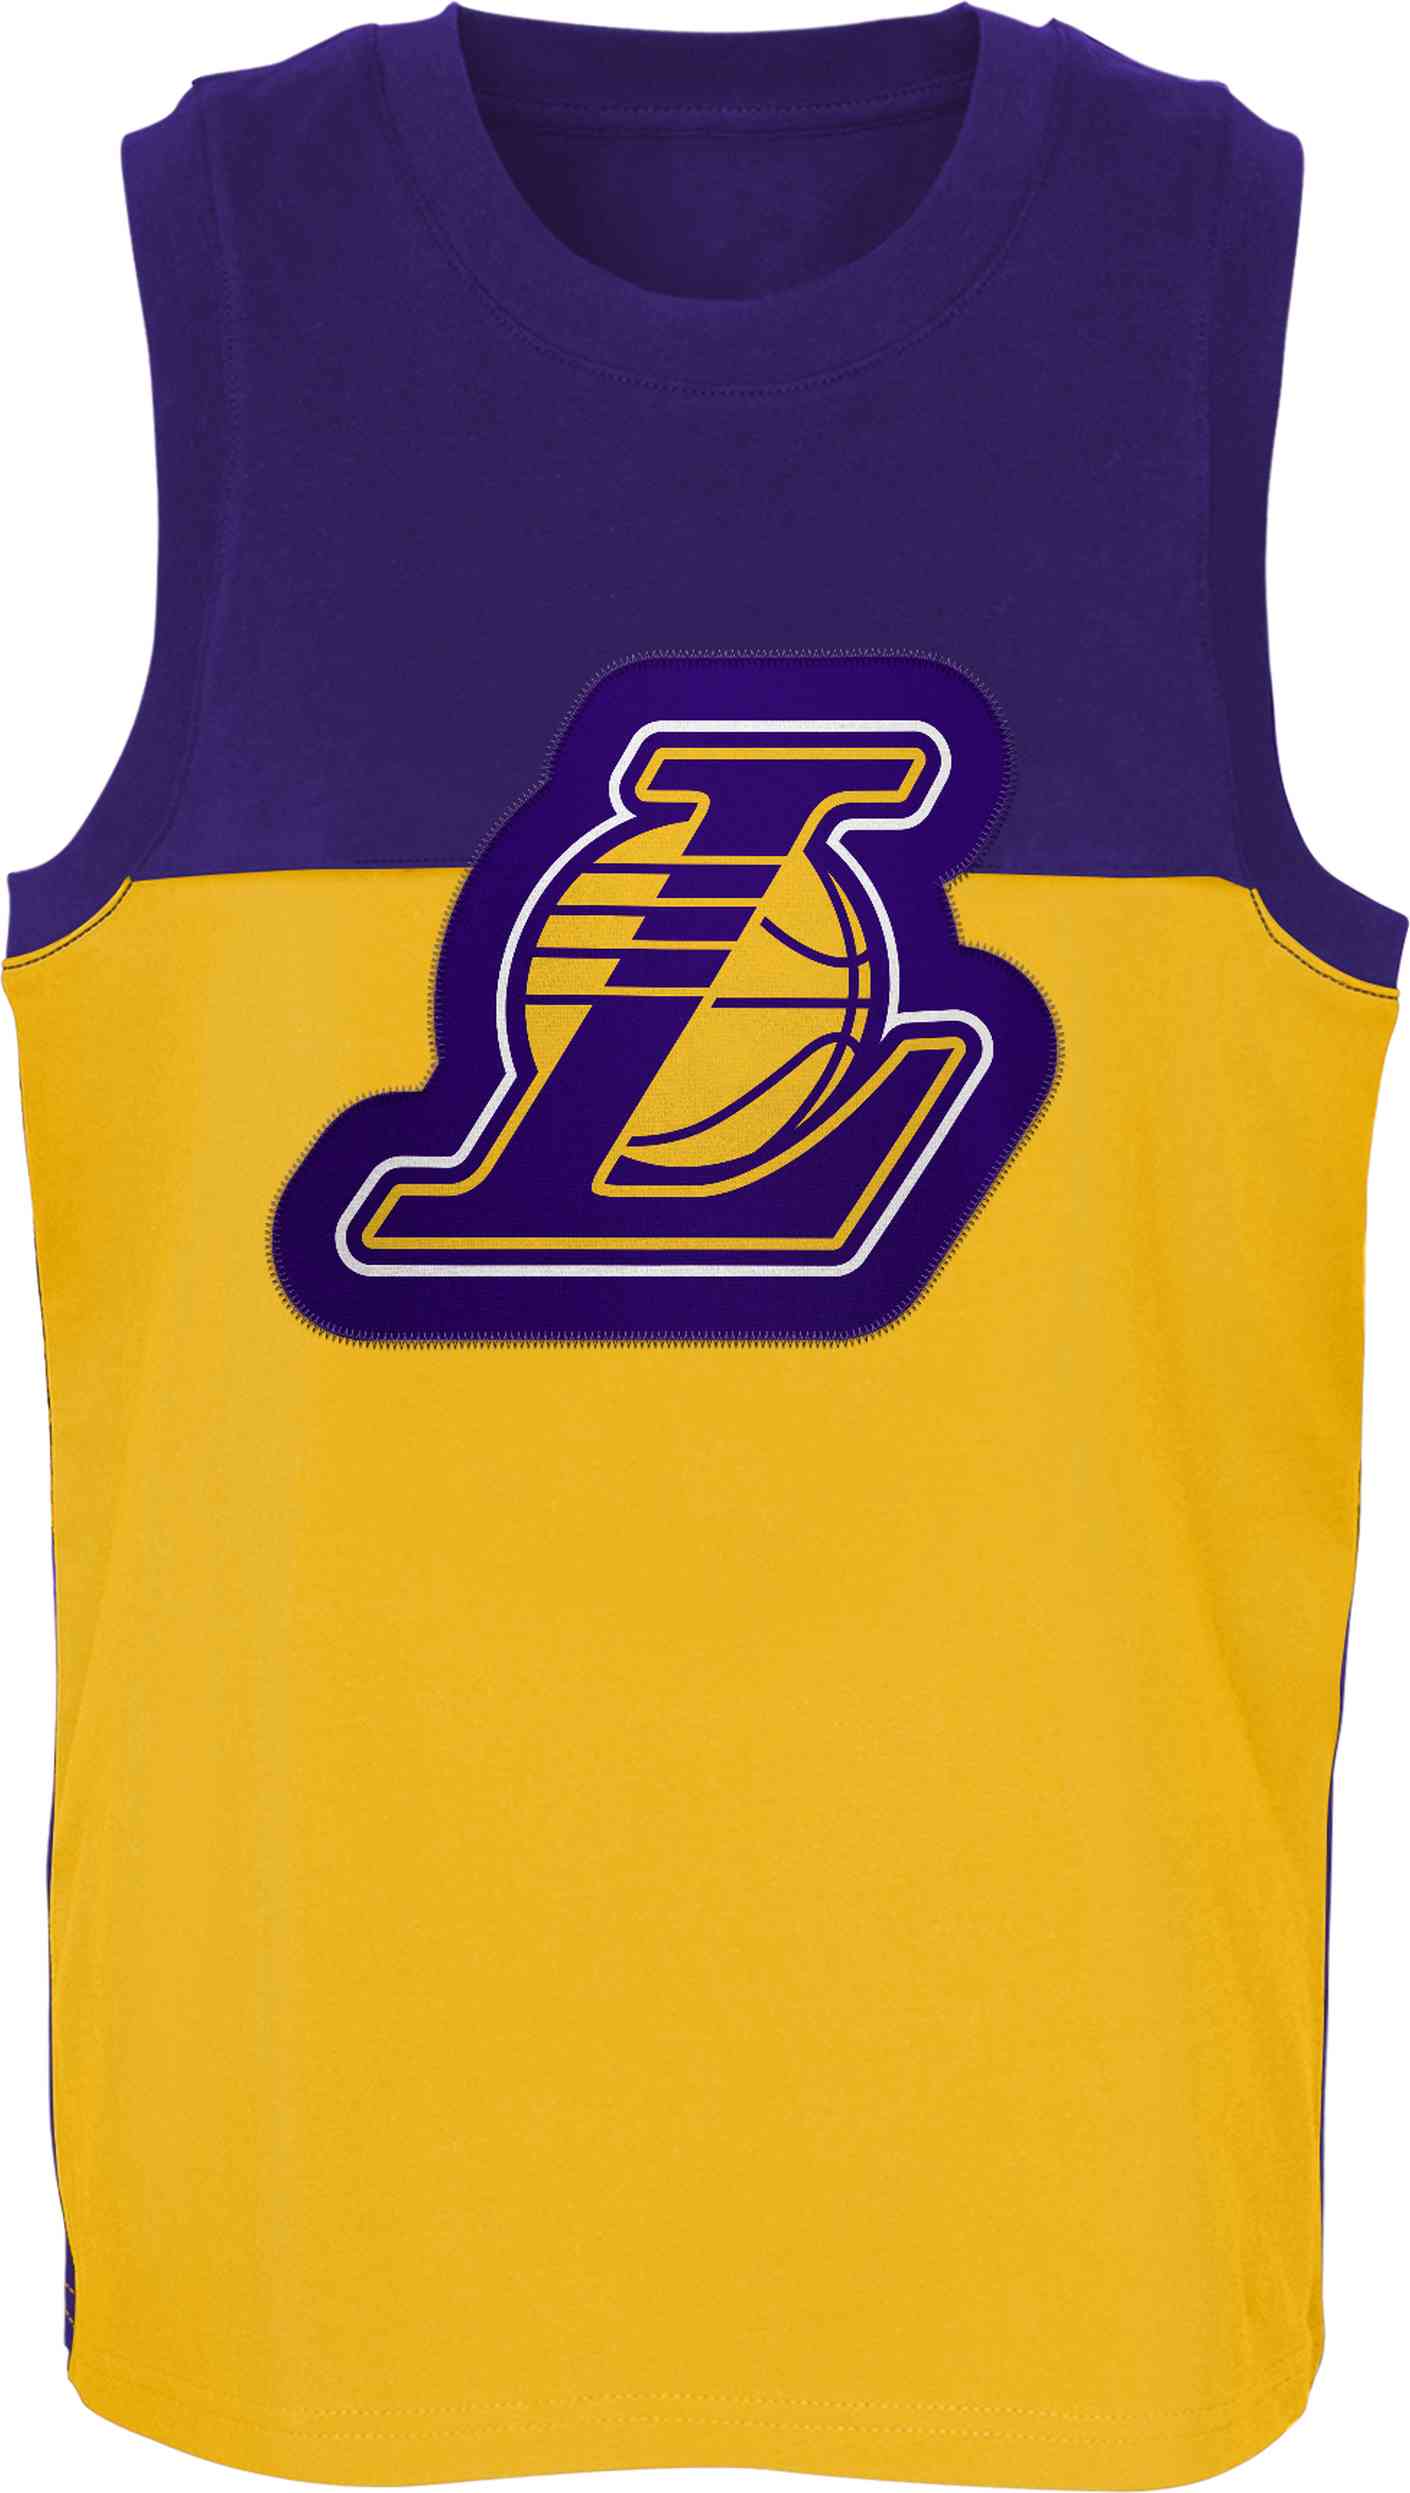 Outerstuff - NBA Los Angeles Lakers Revitalize James Tank Top